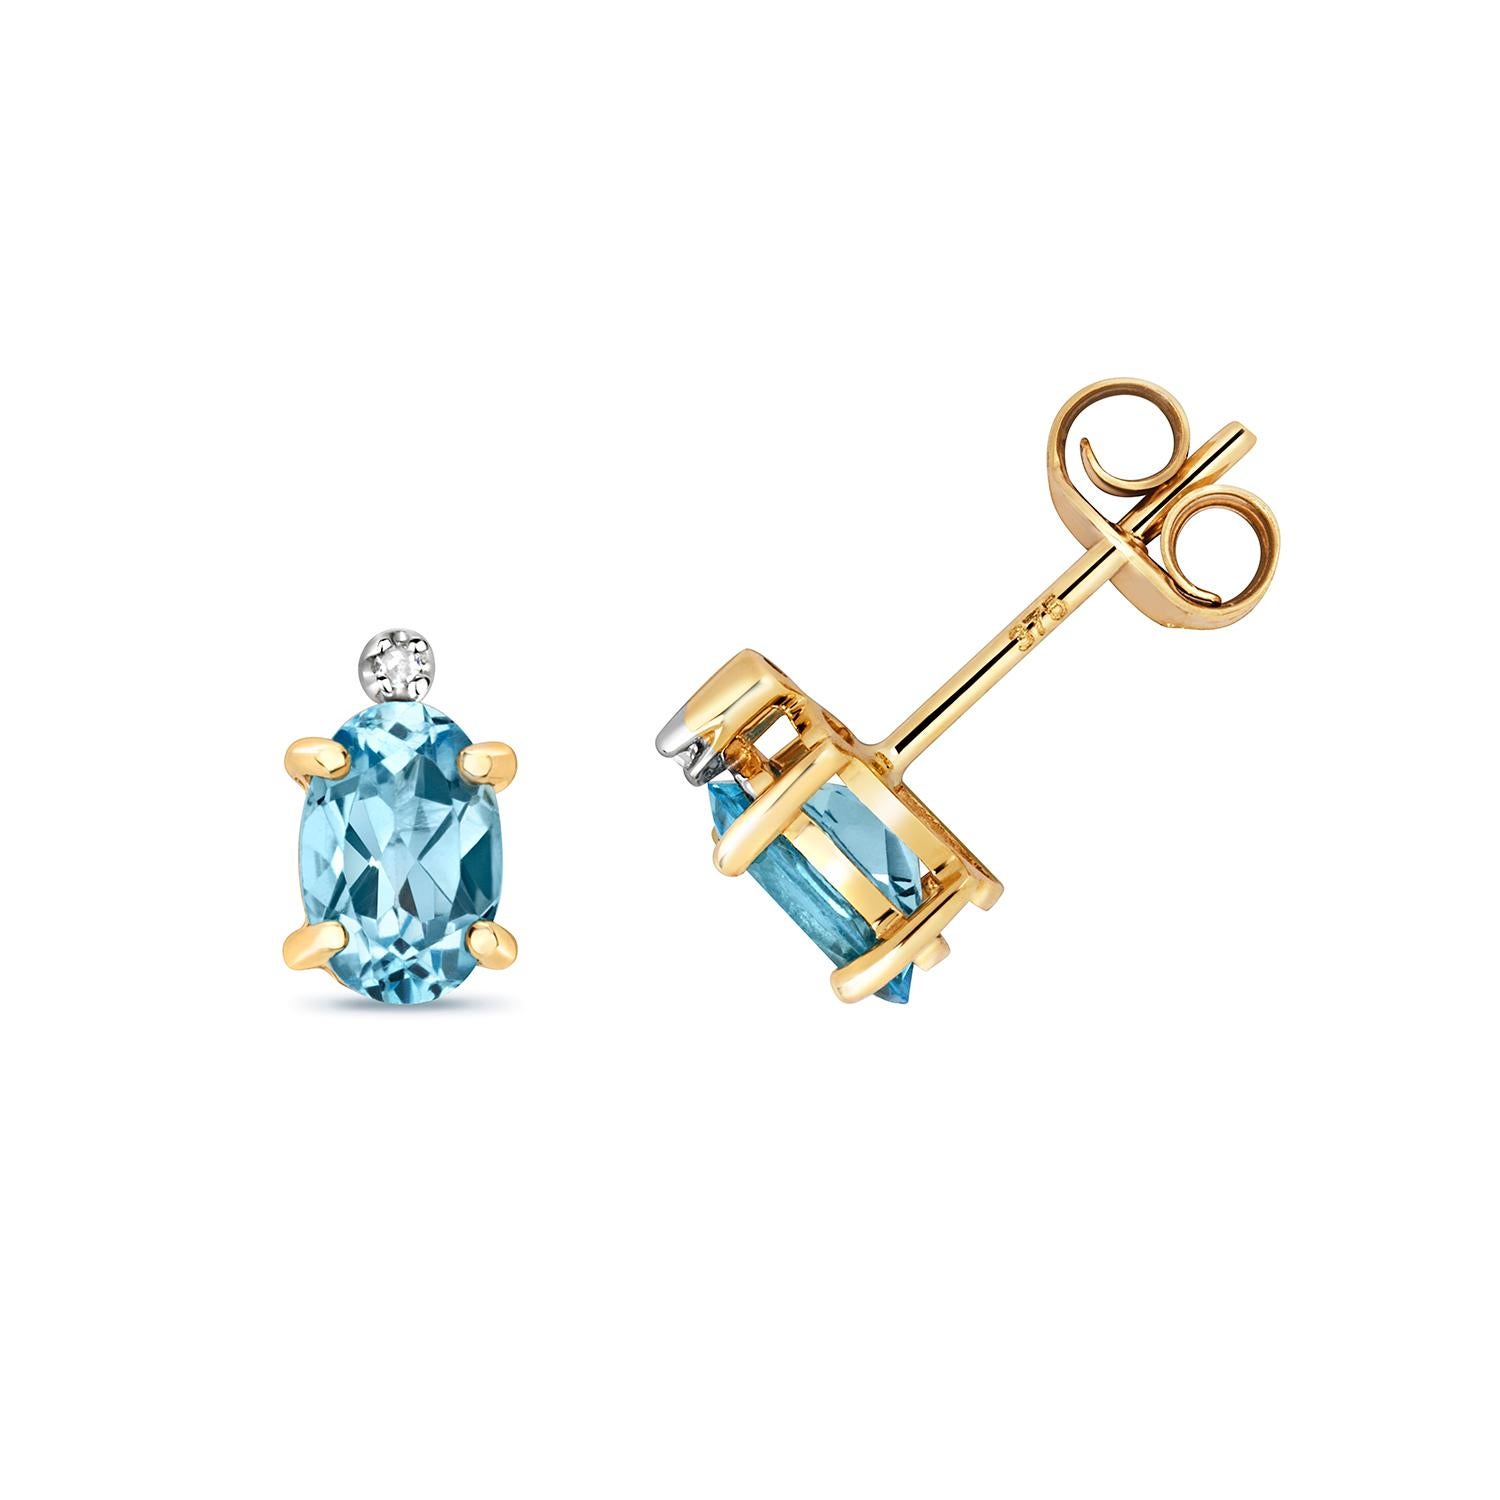 DIAMOND & BLUE TOPAZ STUDS

9CT Y/G SC/0.01CT BTP/0.20CT

Weight: 0.8g

Number Of Stones:2+2

Total Carates:0.200+0.010